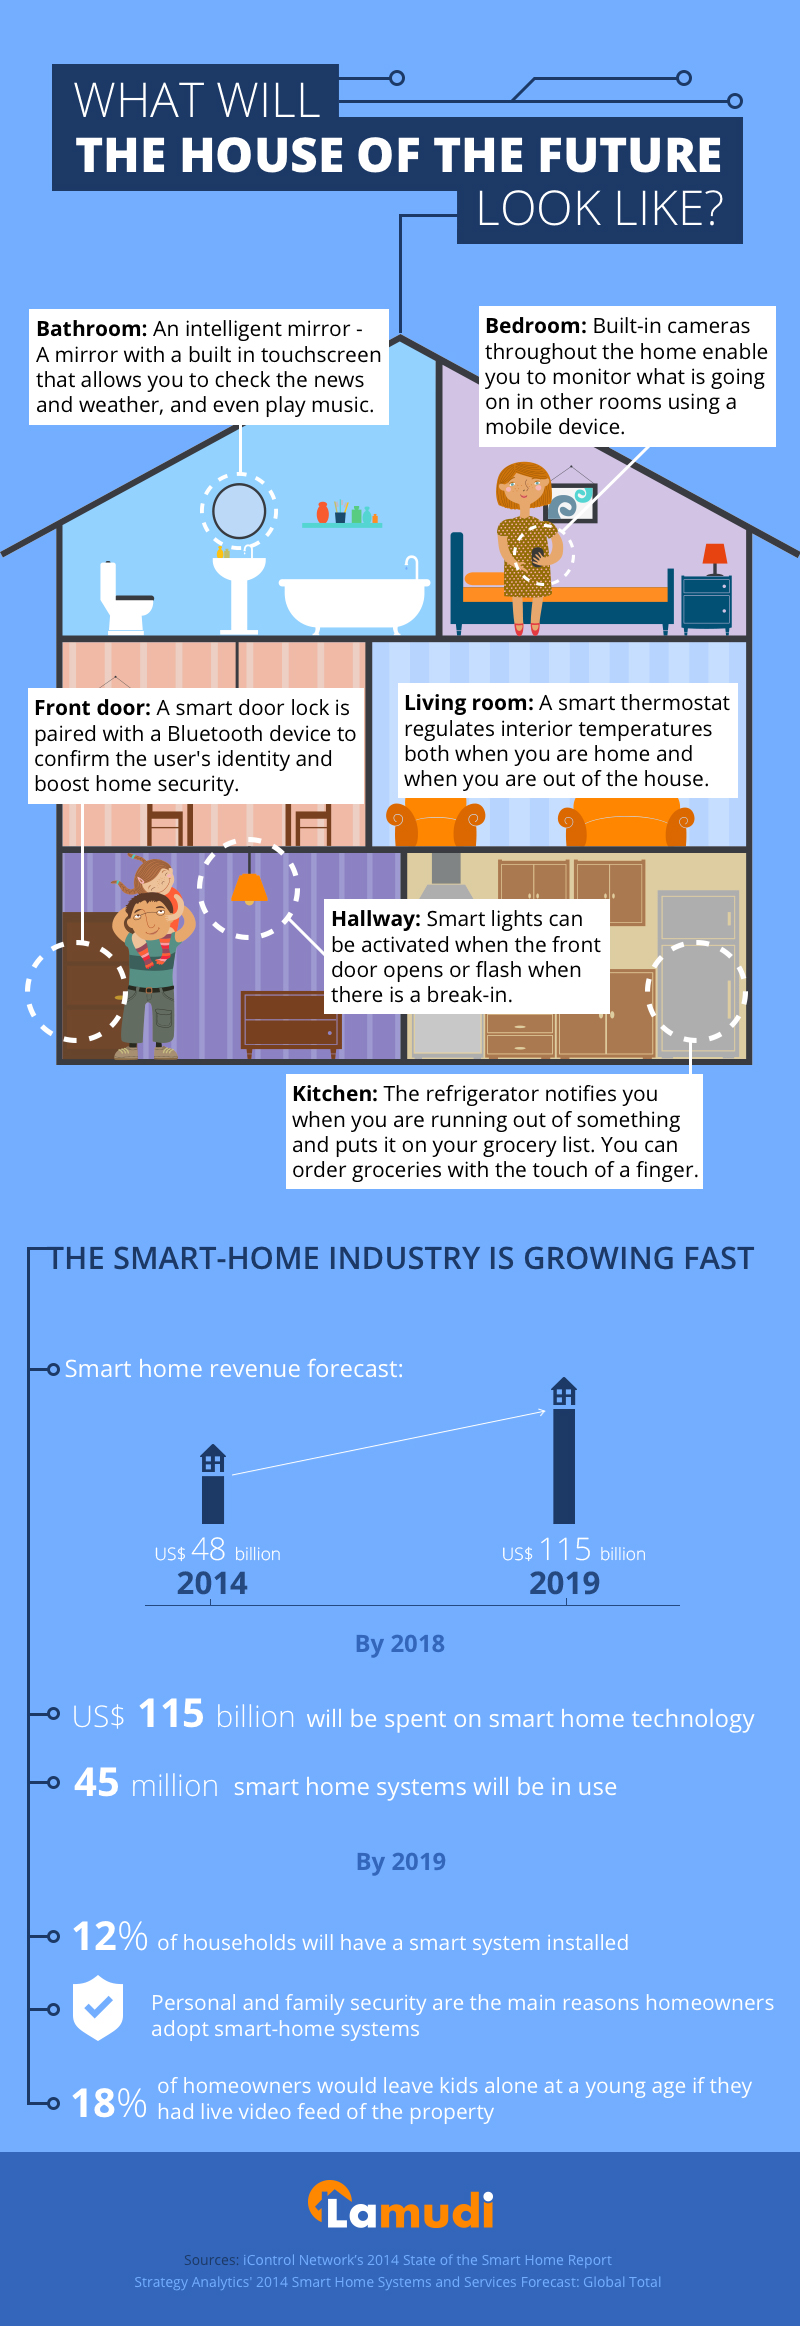 Lamudi Kenya Infographic: What Will Your House Look Like In 10 Years?